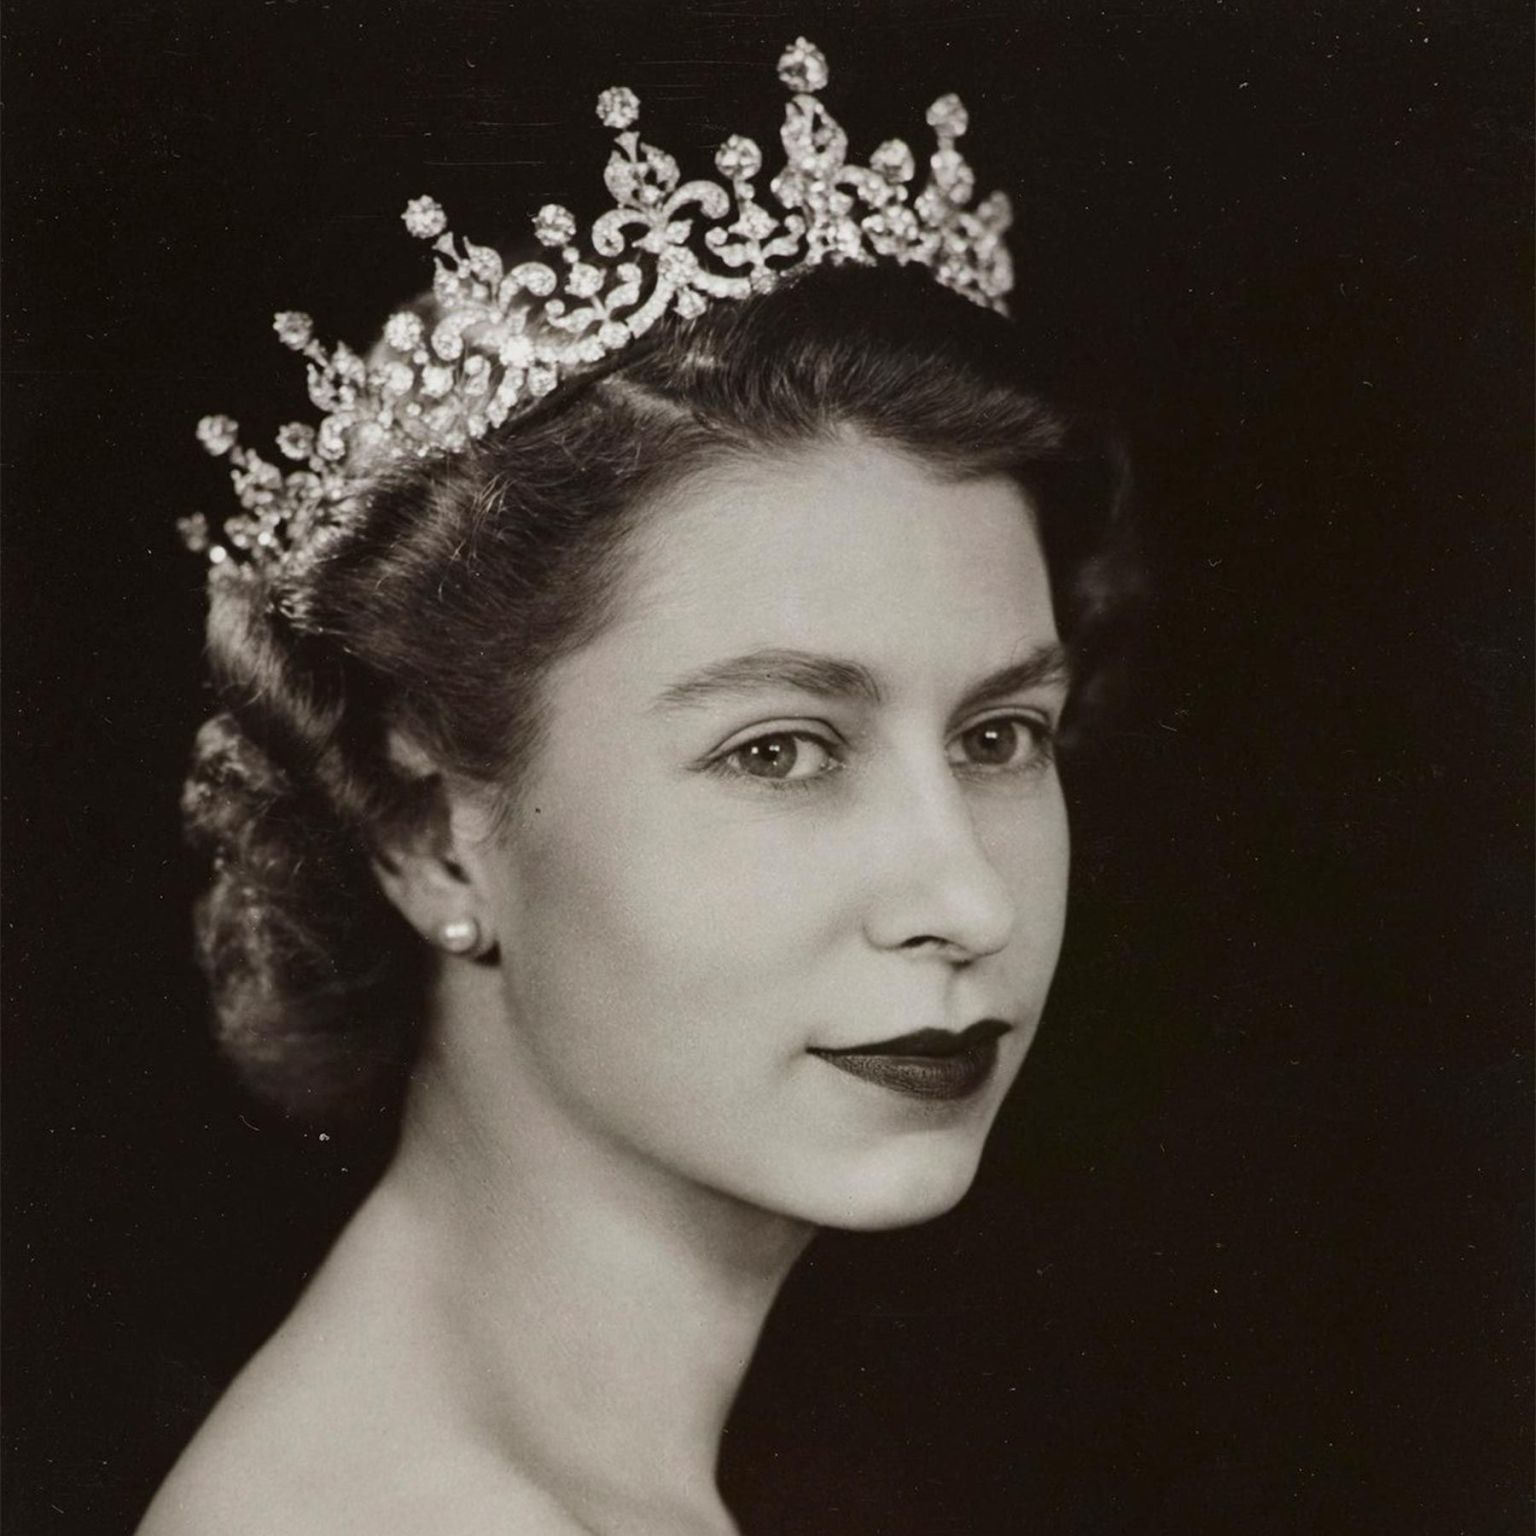 Rest in Peace your Majesty 1926 - 2022